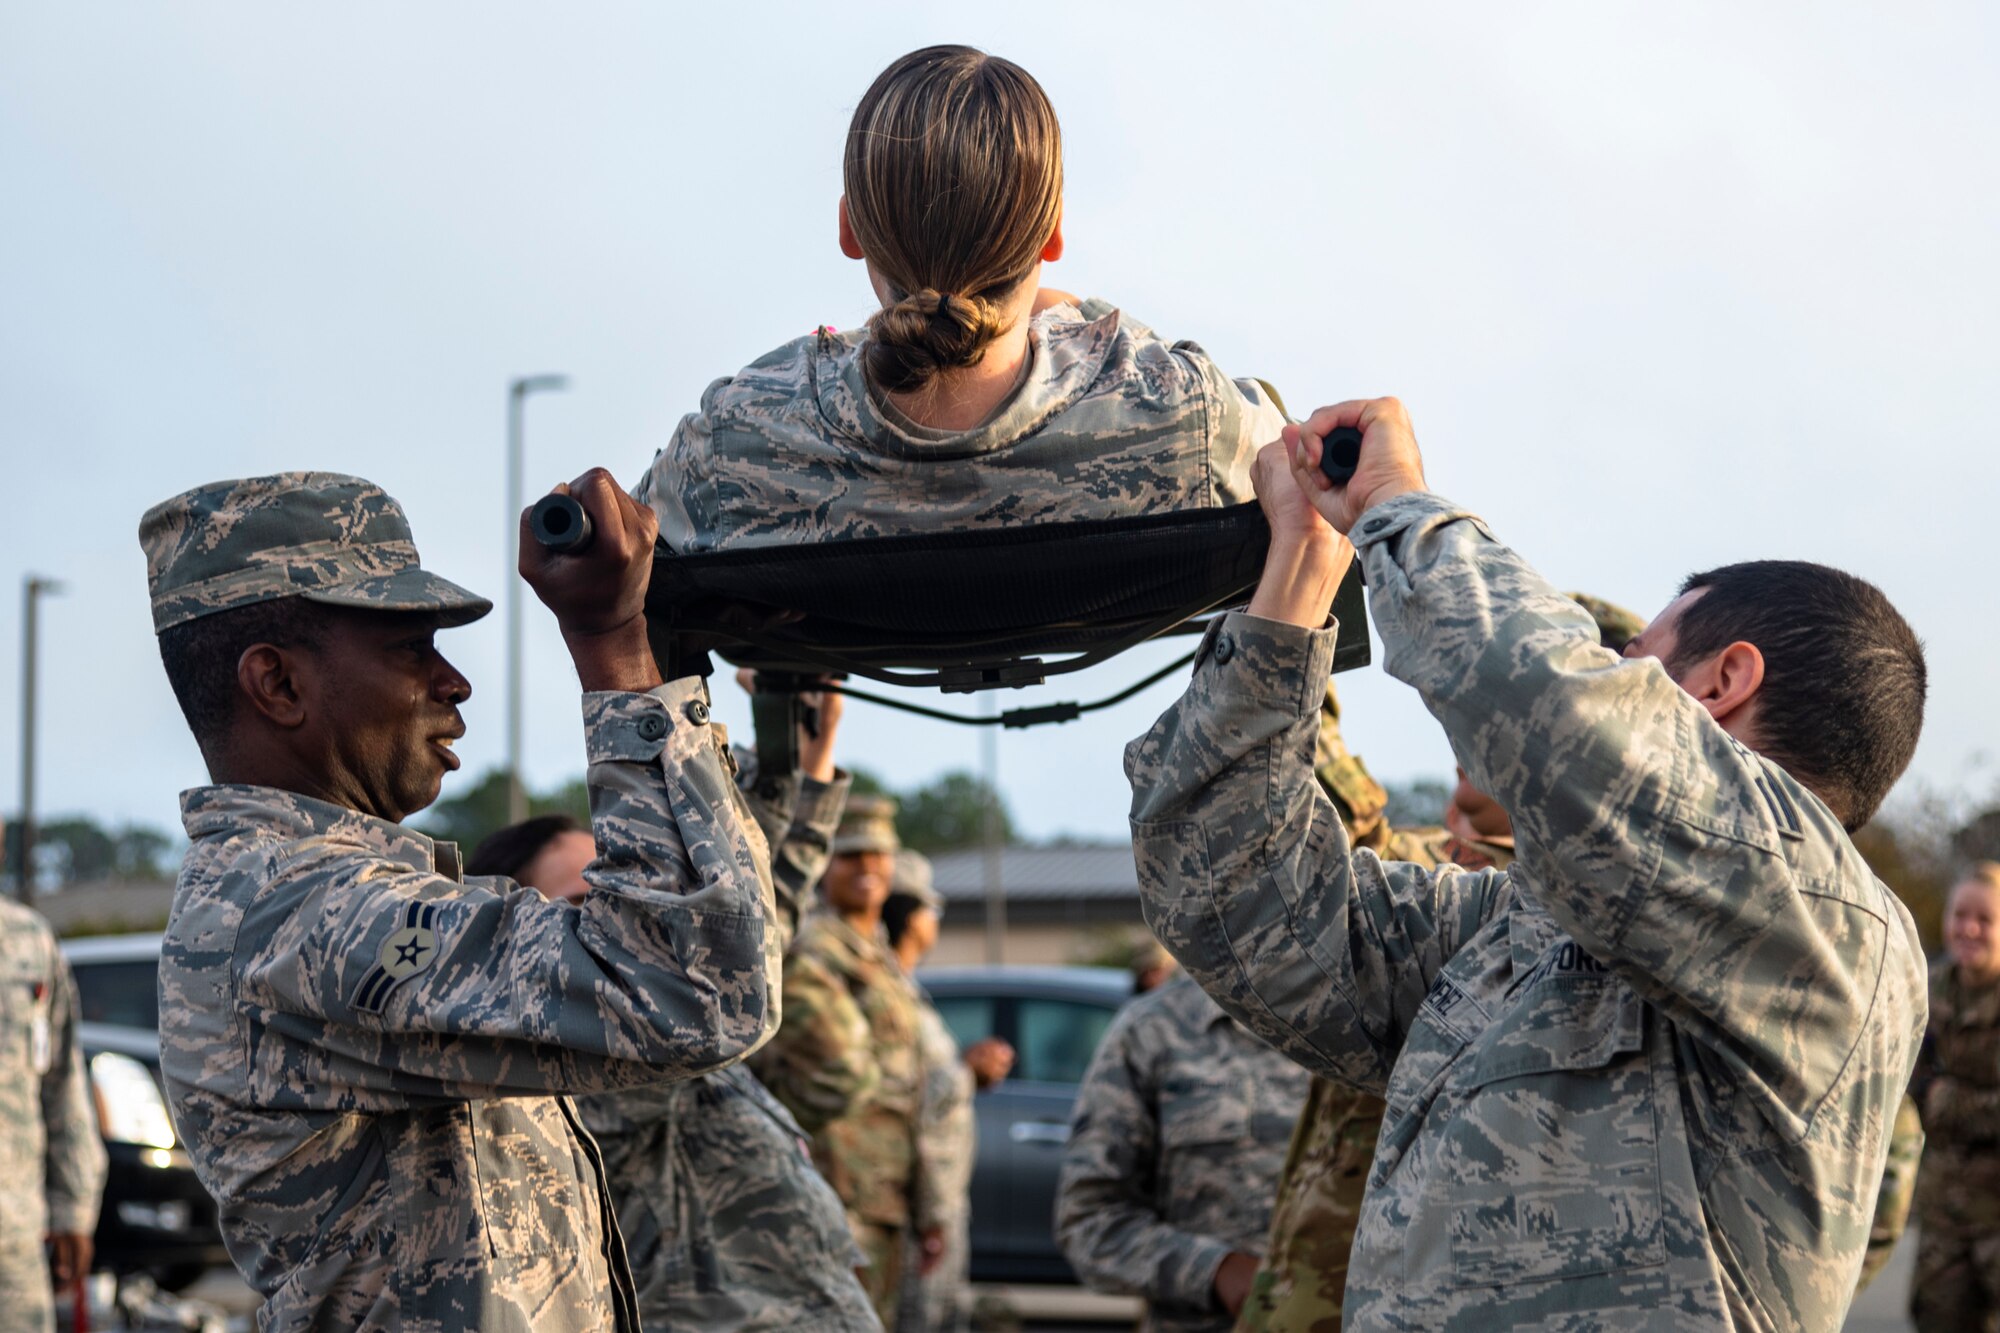 Airmen with the 23d Medical Group (MDG) practice lateral litter-carry movements during training Oct. 25, 2019, at Moody Air Force Base, Ga. The 23d MDG conducted the training in preparation for the upcoming Thunder Over South Georgia Open House. Airmen practiced litter-carry movements and commands to ensure they have the appropriate skills in the case of an emergency. (U.S. Air Force photo by Airman 1st Class Taryn Butler)